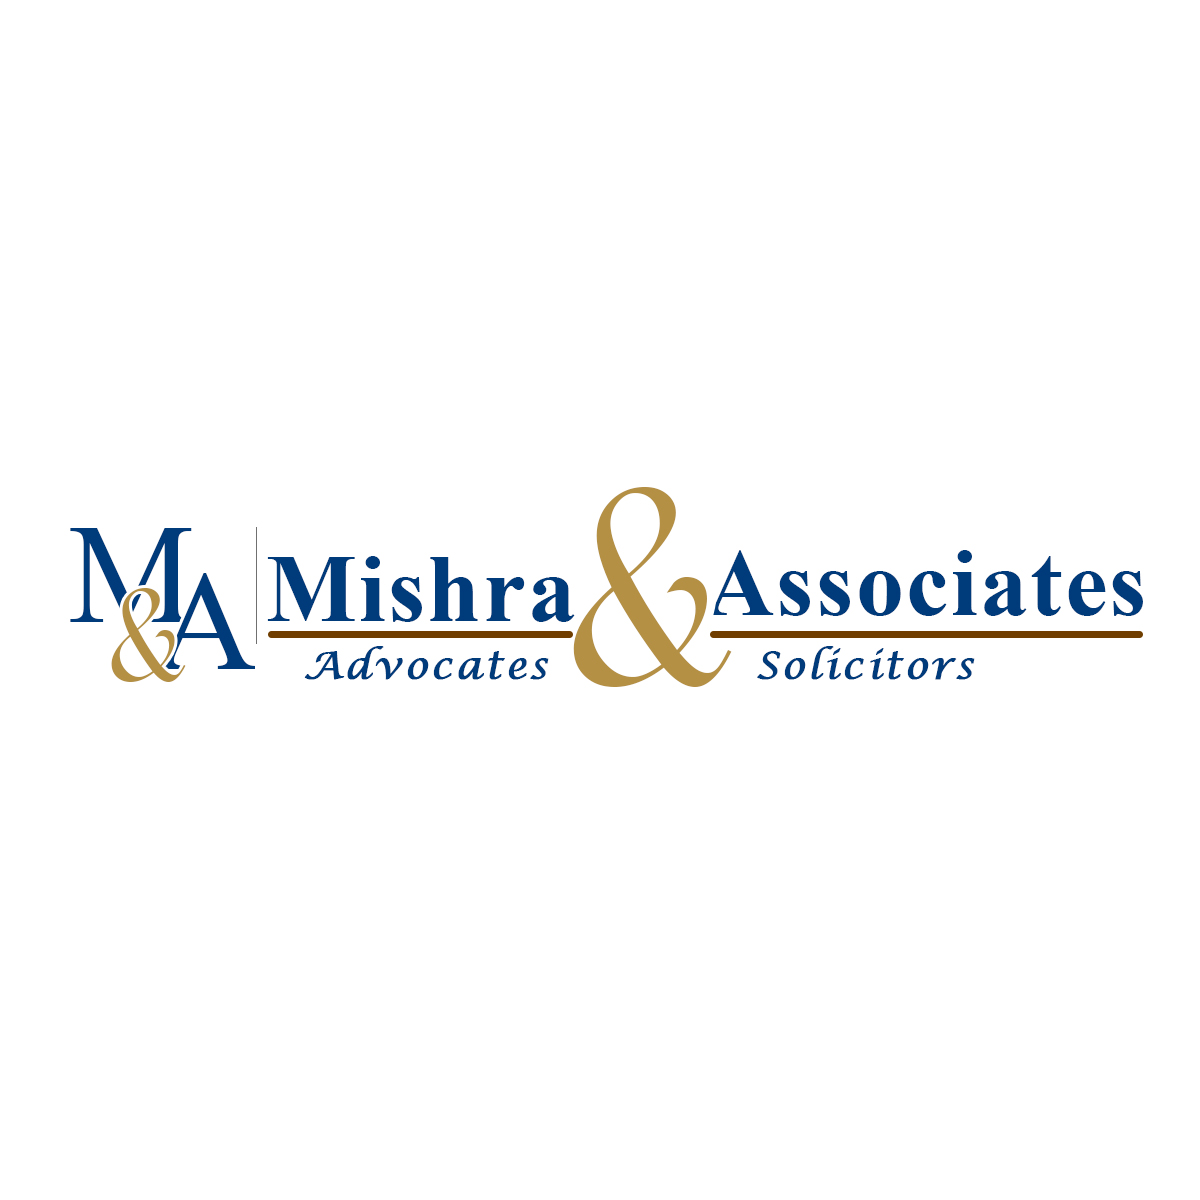 Mishra & Associates Law Firm|Accounting Services|Professional Services